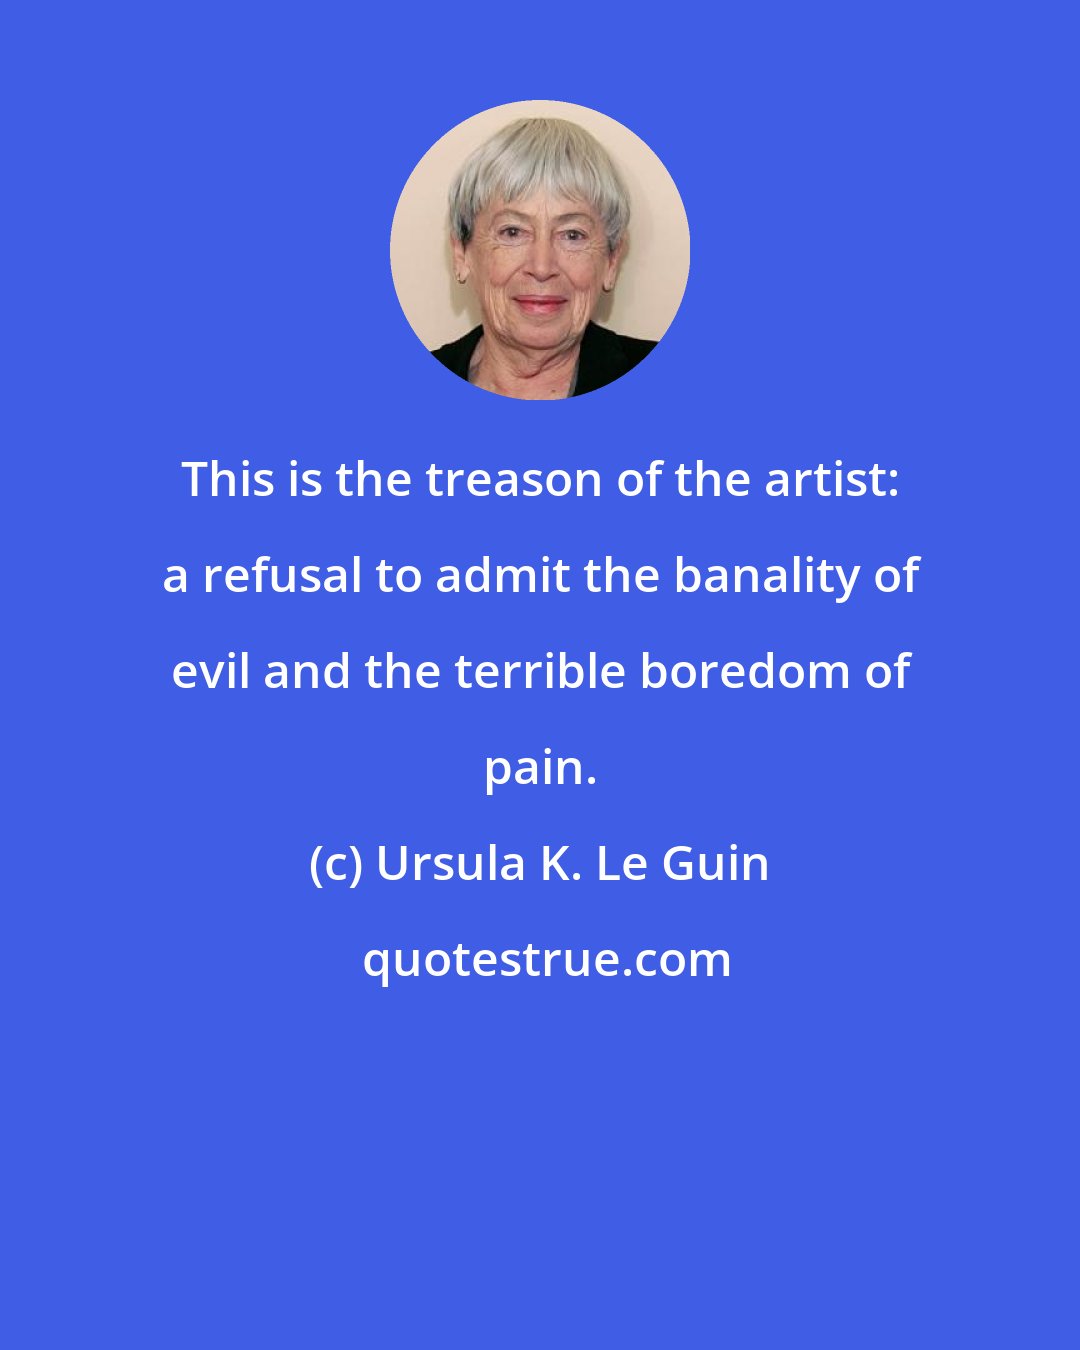 Ursula K. Le Guin: This is the treason of the artist: a refusal to admit the banality of evil and the terrible boredom of pain.